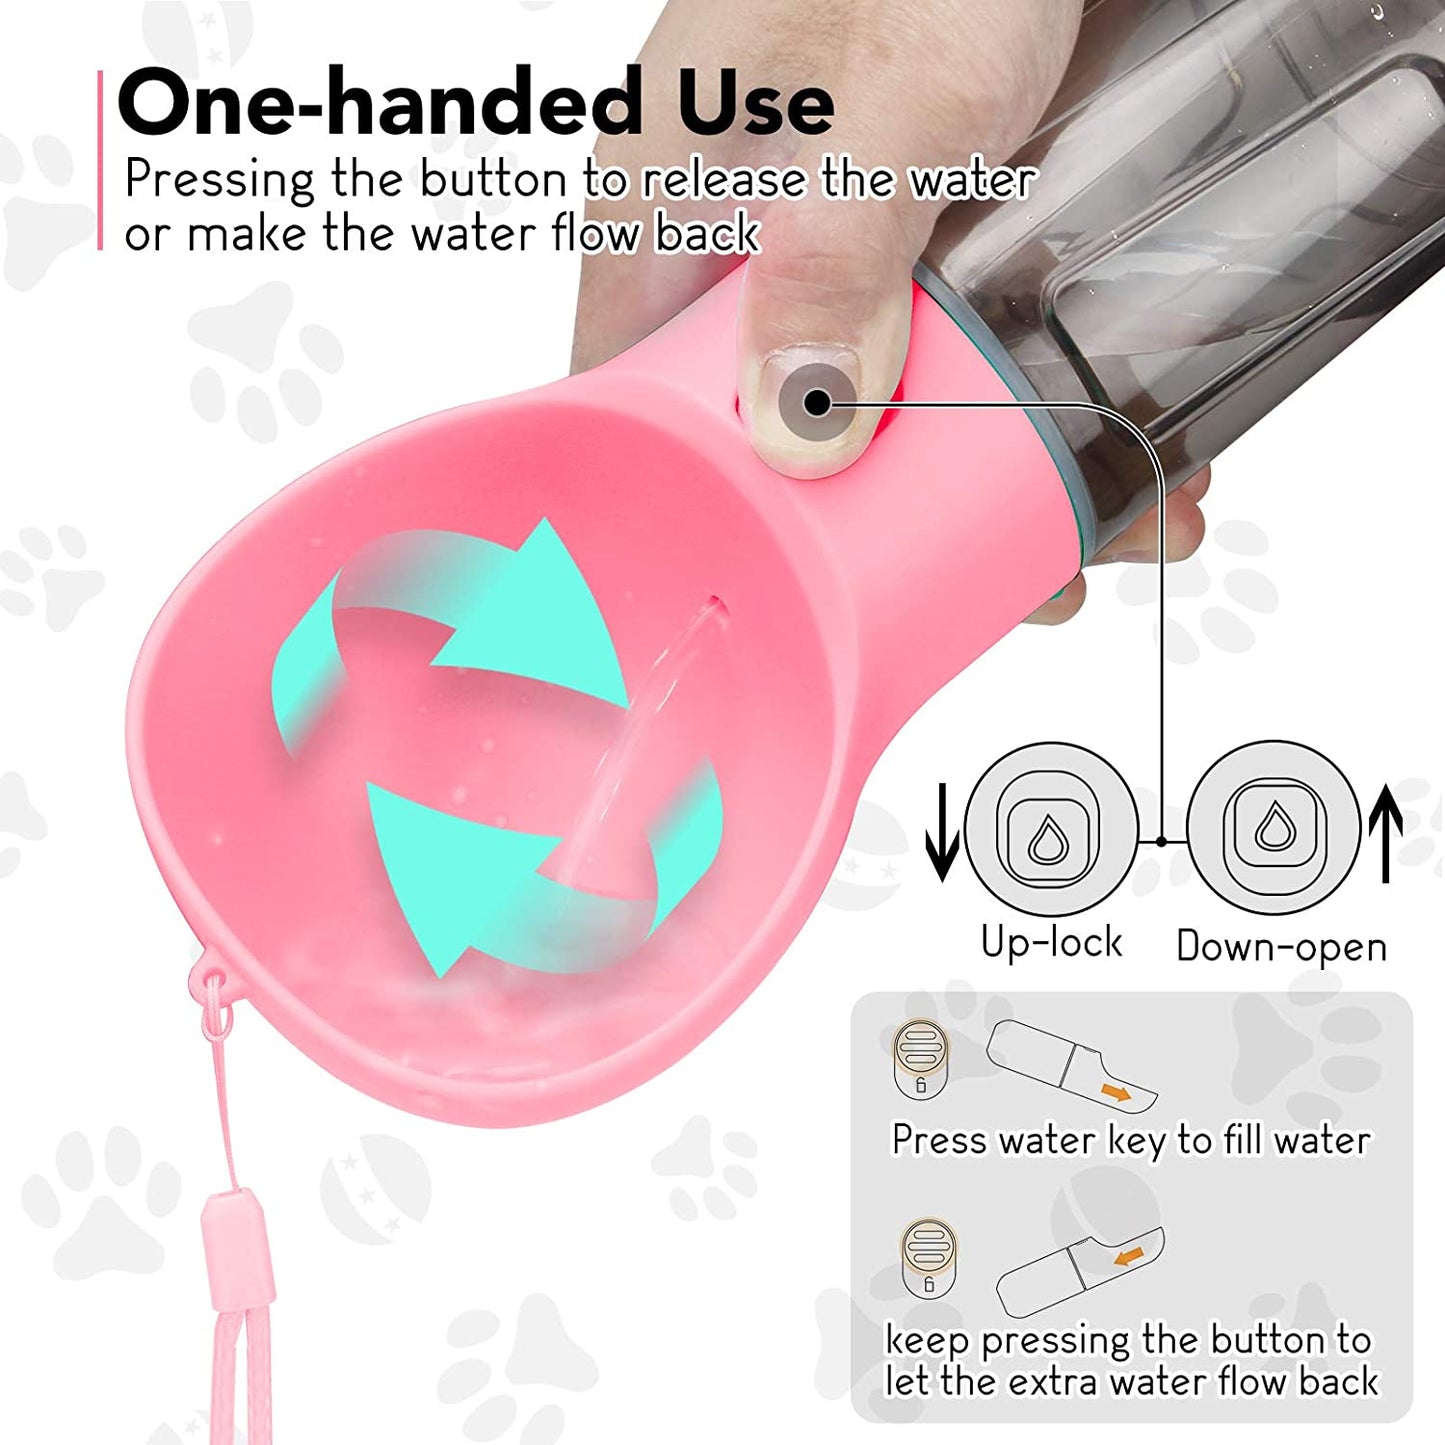 Qpets Dog Water Bottles Portable Leak Proof Dog Water Dispenser with Drinking and Feeding Function Lightweight Pet Water Dispenser for Walking and Travel for Dog, Cat 300ml(Pink)